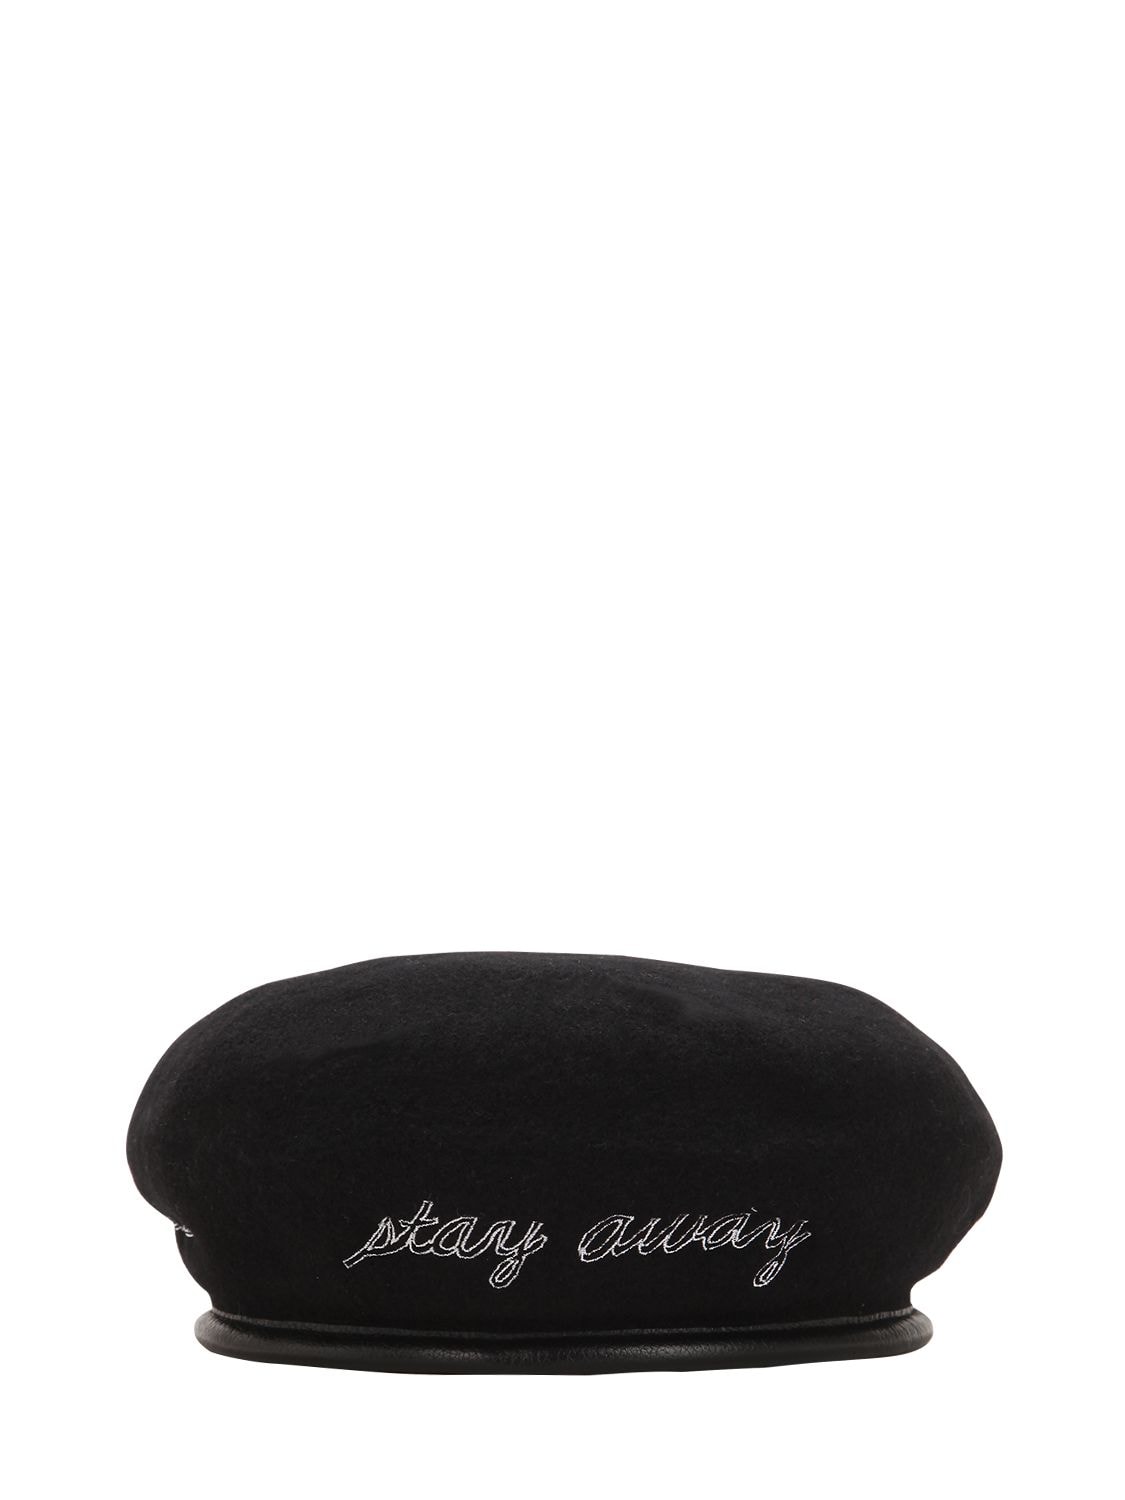 Azs Tokyo I Cried For You Distressed Beret In Black